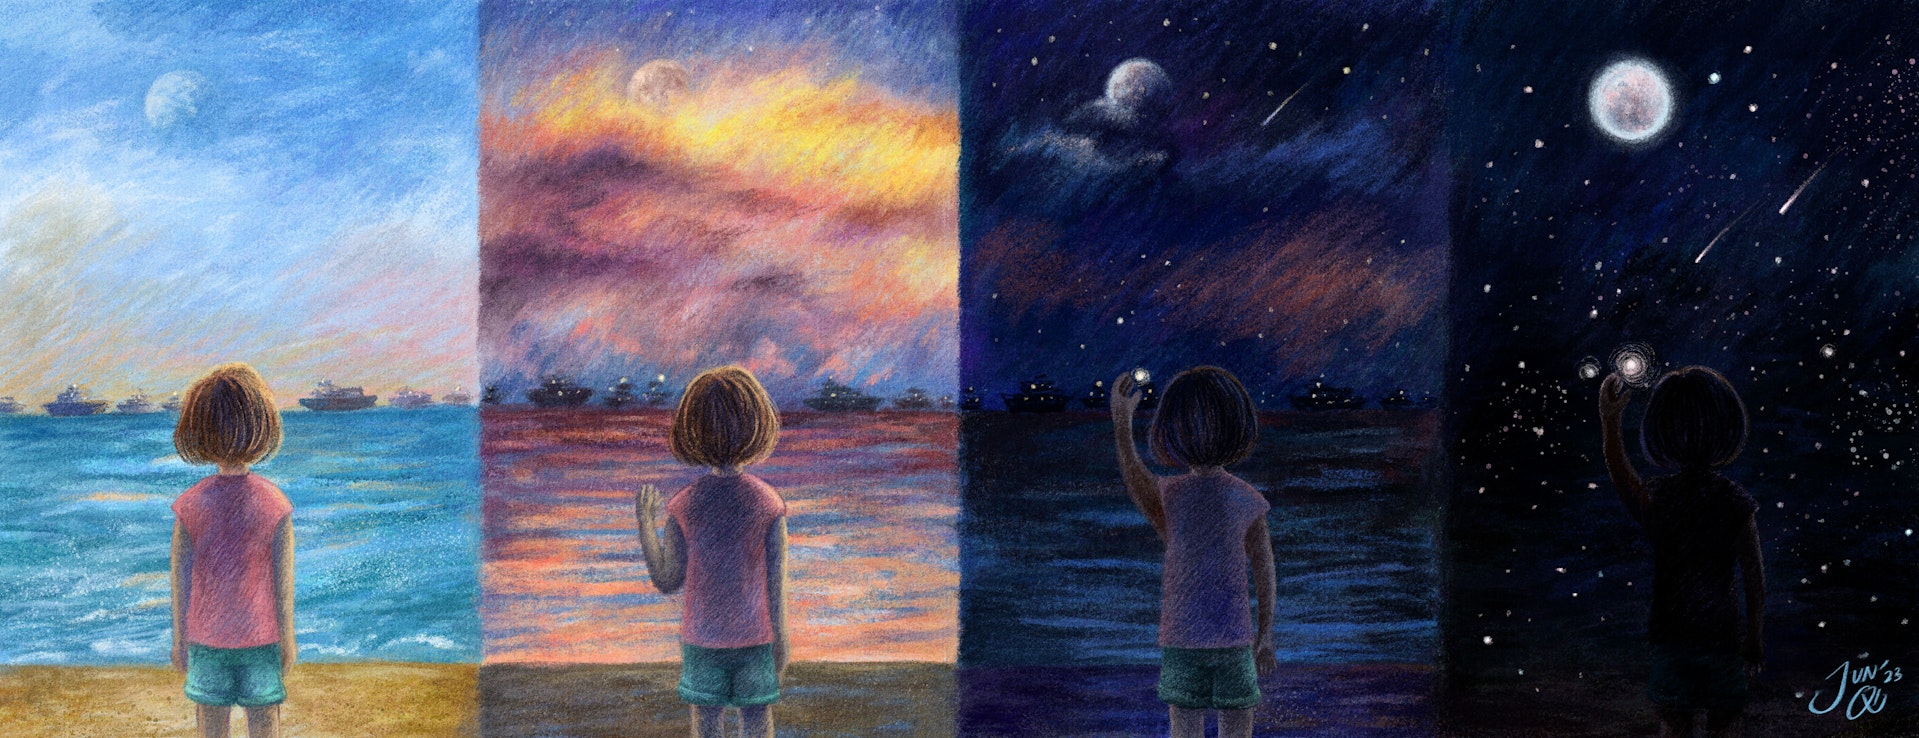 Illustration over four panels of a young girl standing before a beach, from day to dusk to night, when the moon and stars emerge, with ships on the horizon in the distance